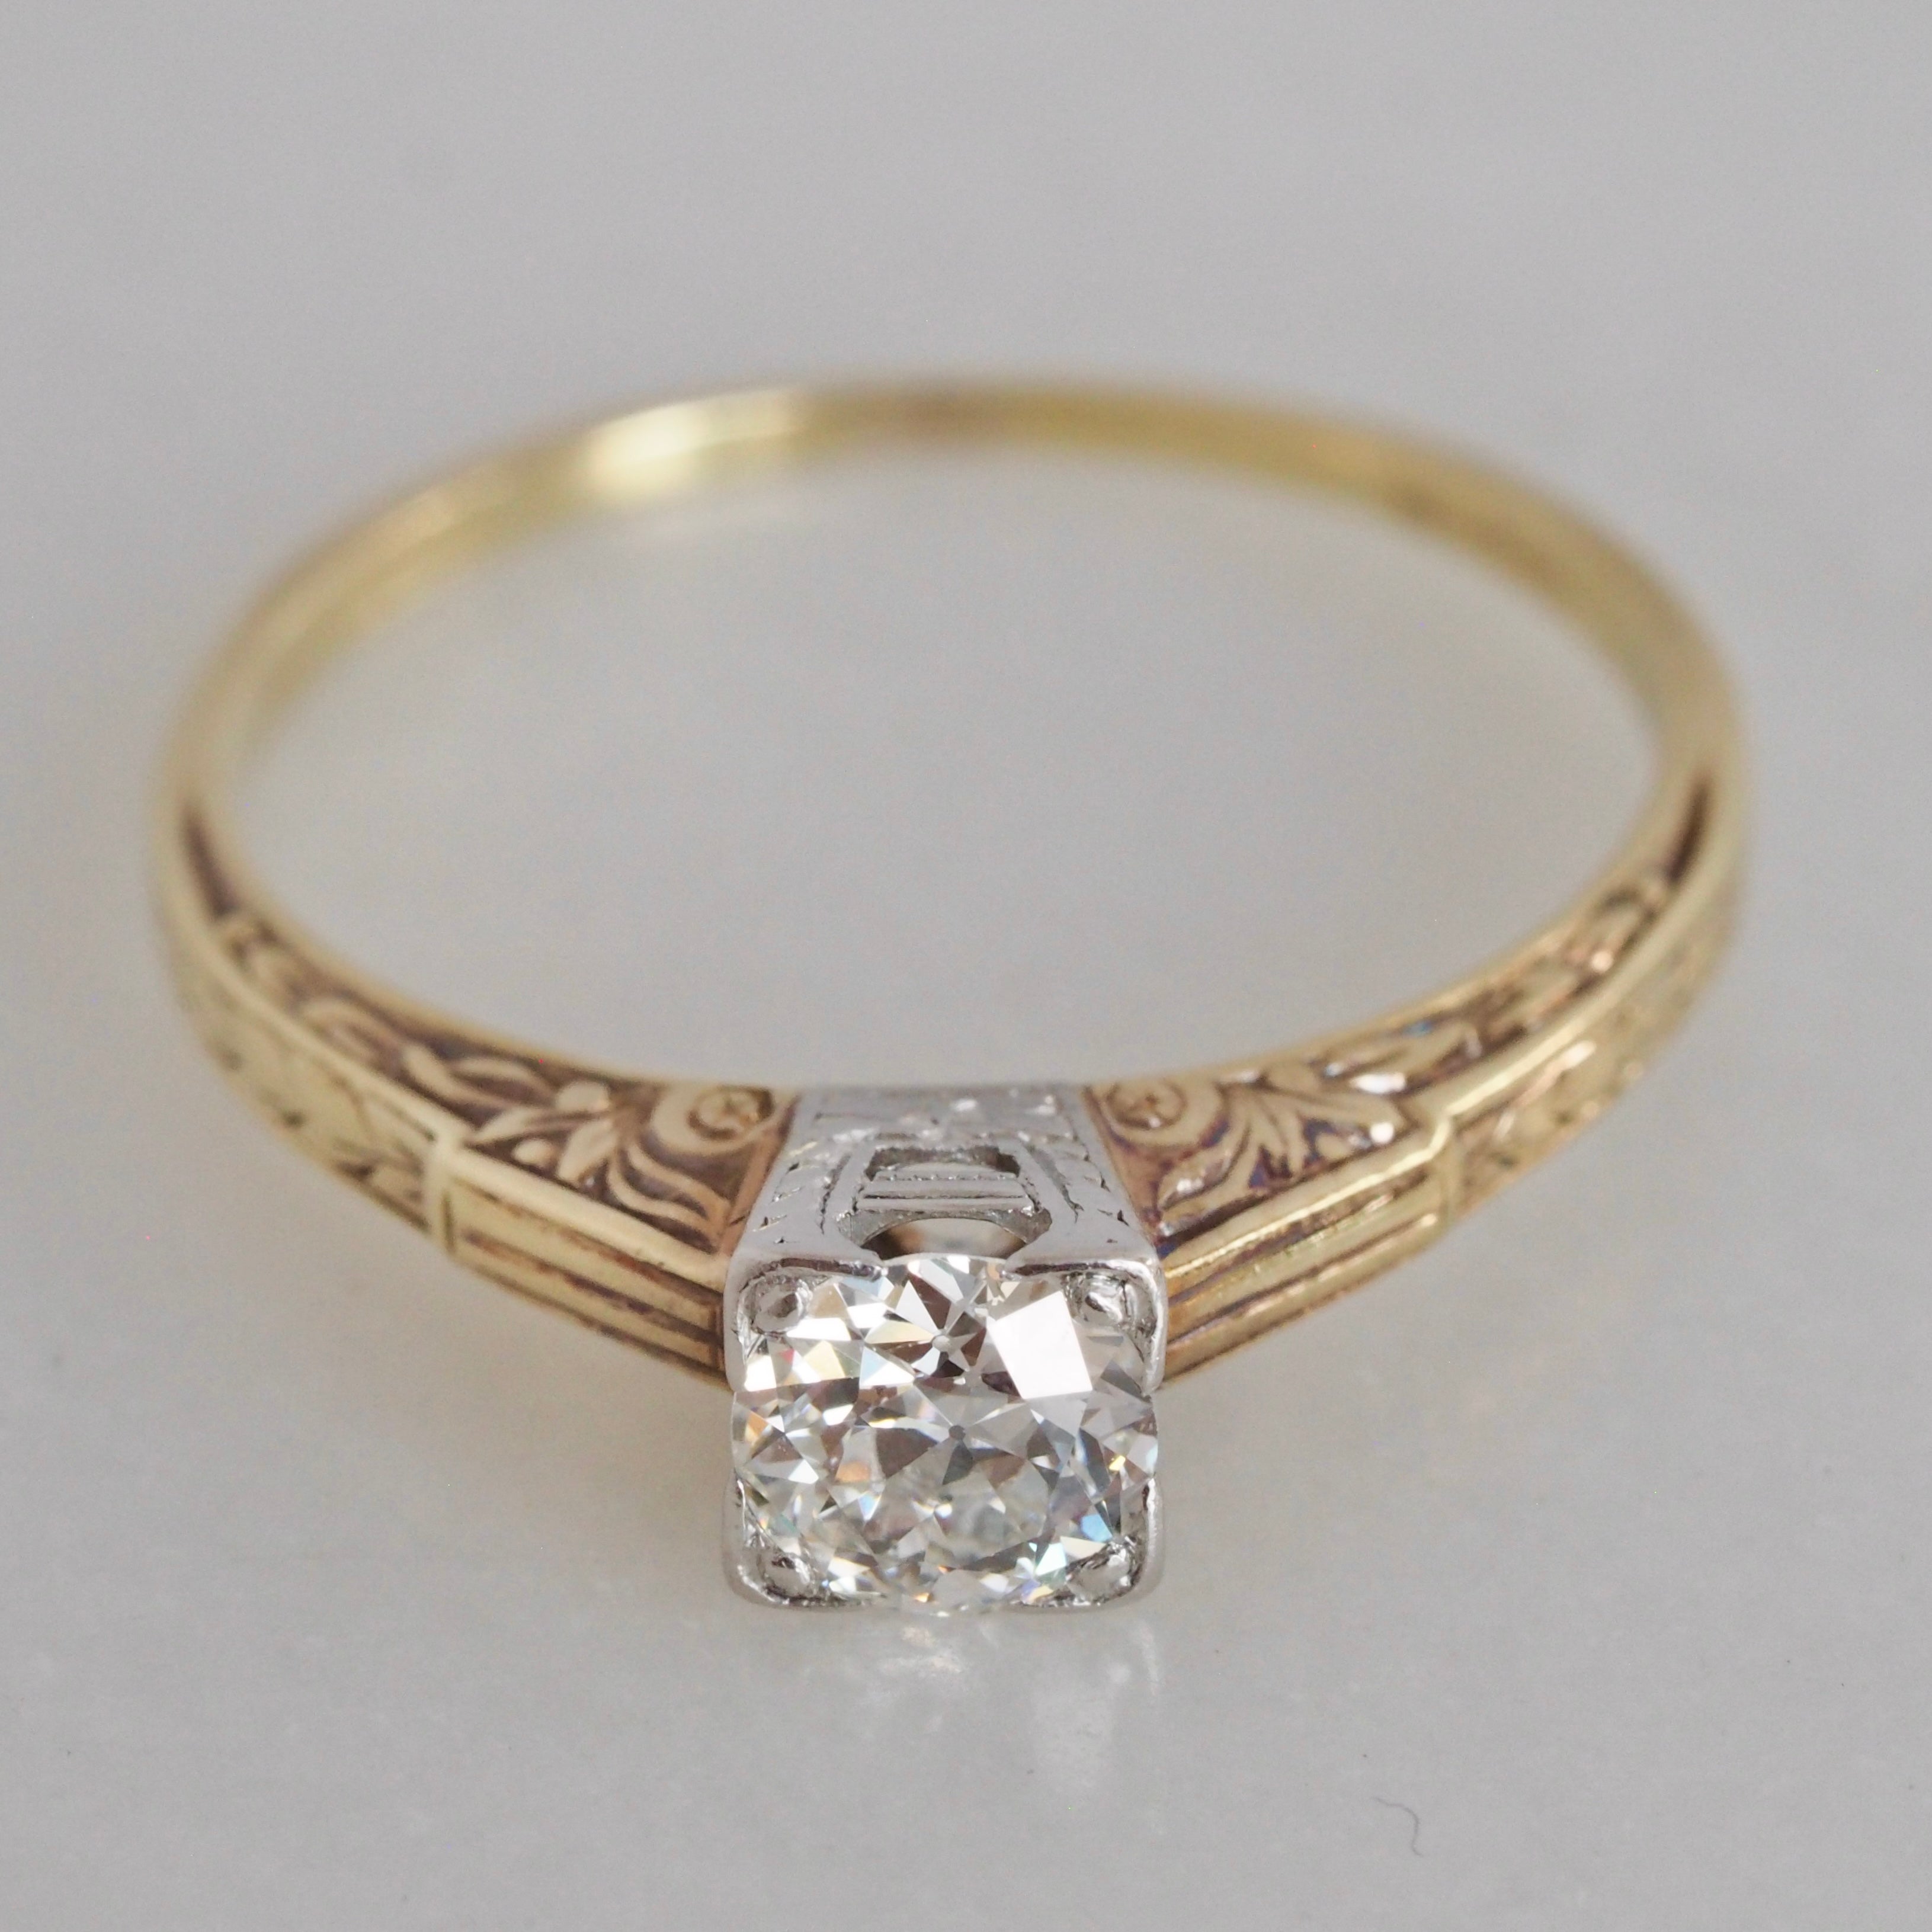 Art Deco 14k White and Yellow Gold Old European Cut Diamond Engagement Ring